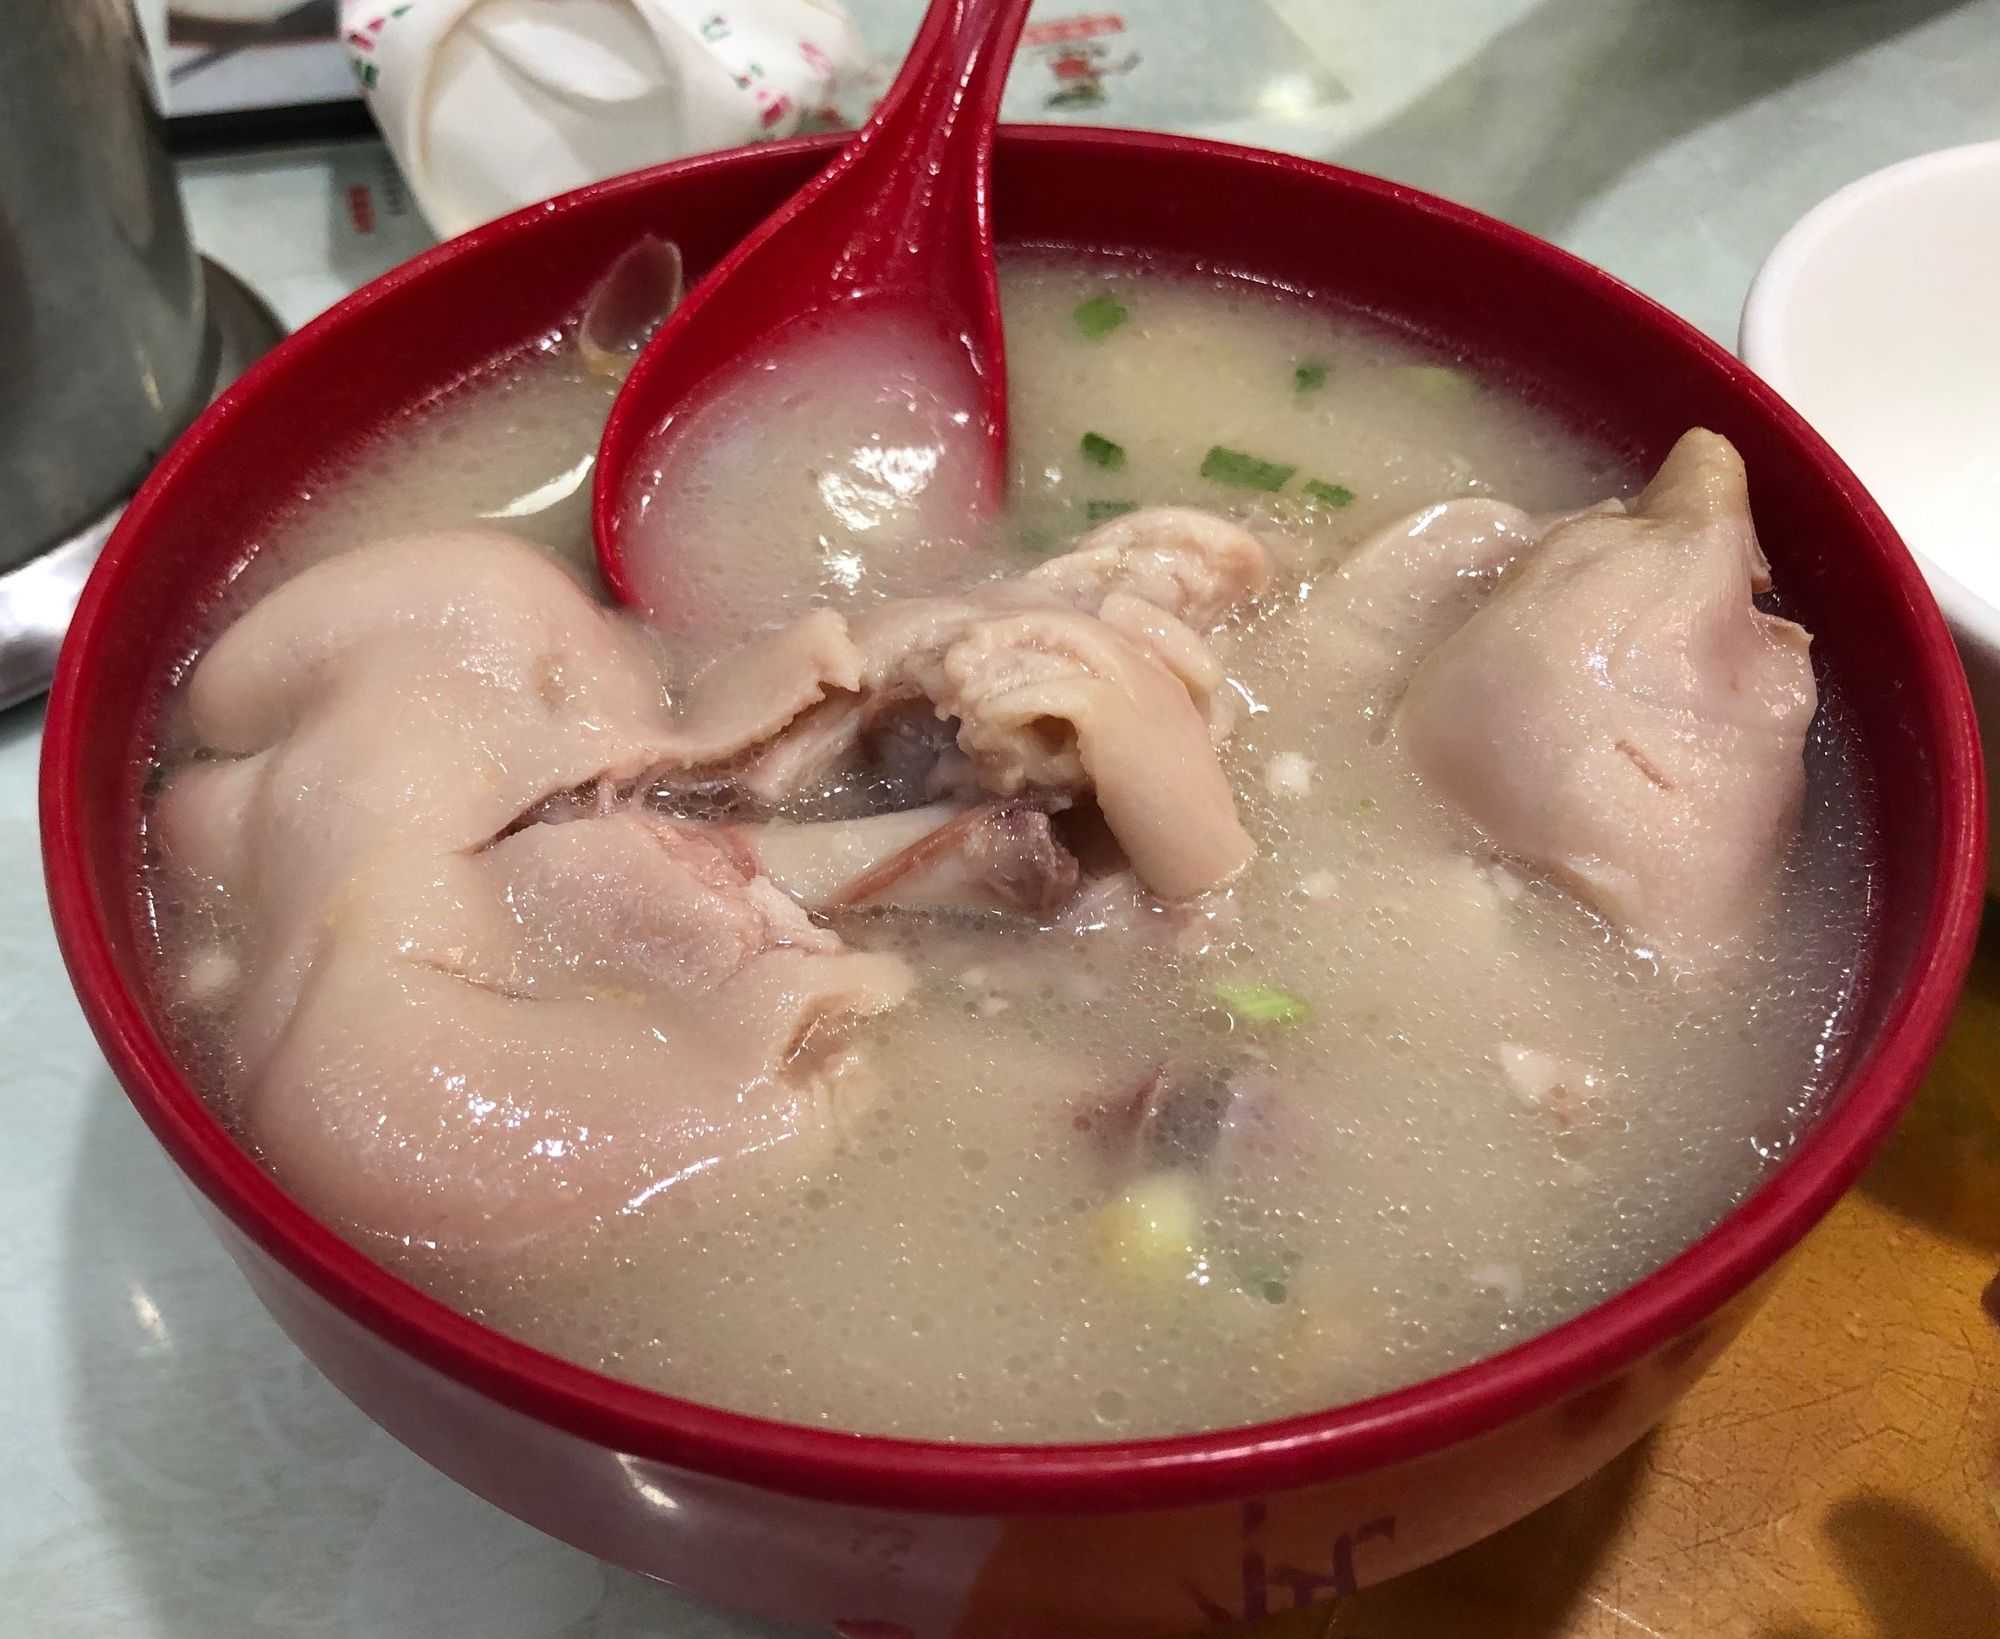 Mom's pig feet (老妈蹄花) (Image by author)